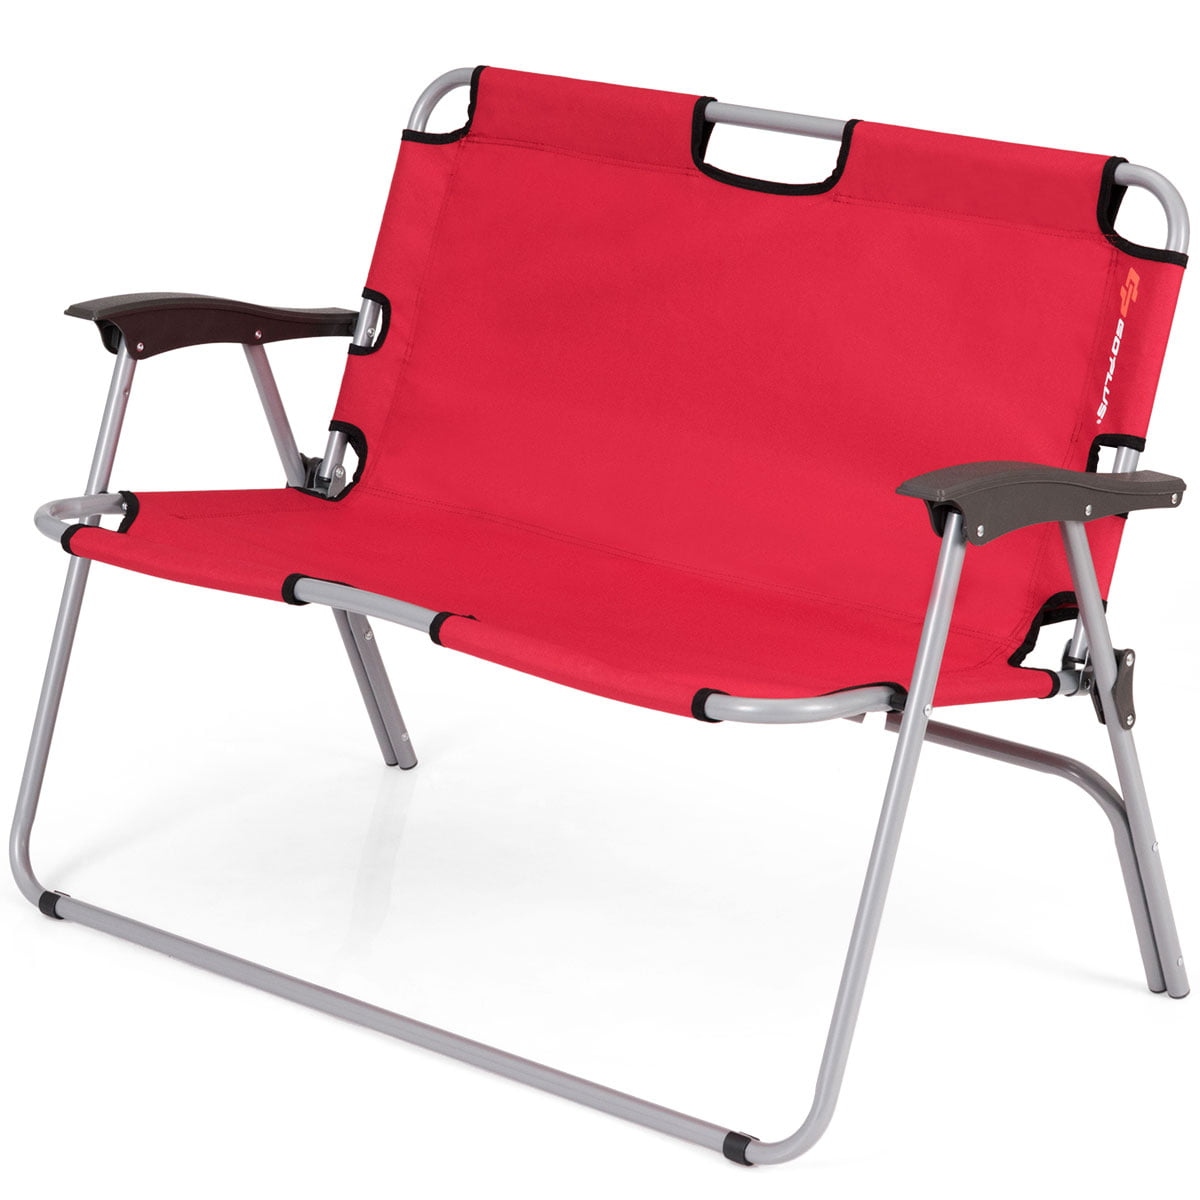 2 Person Camping Folding Chair Loveseat Bench Portable